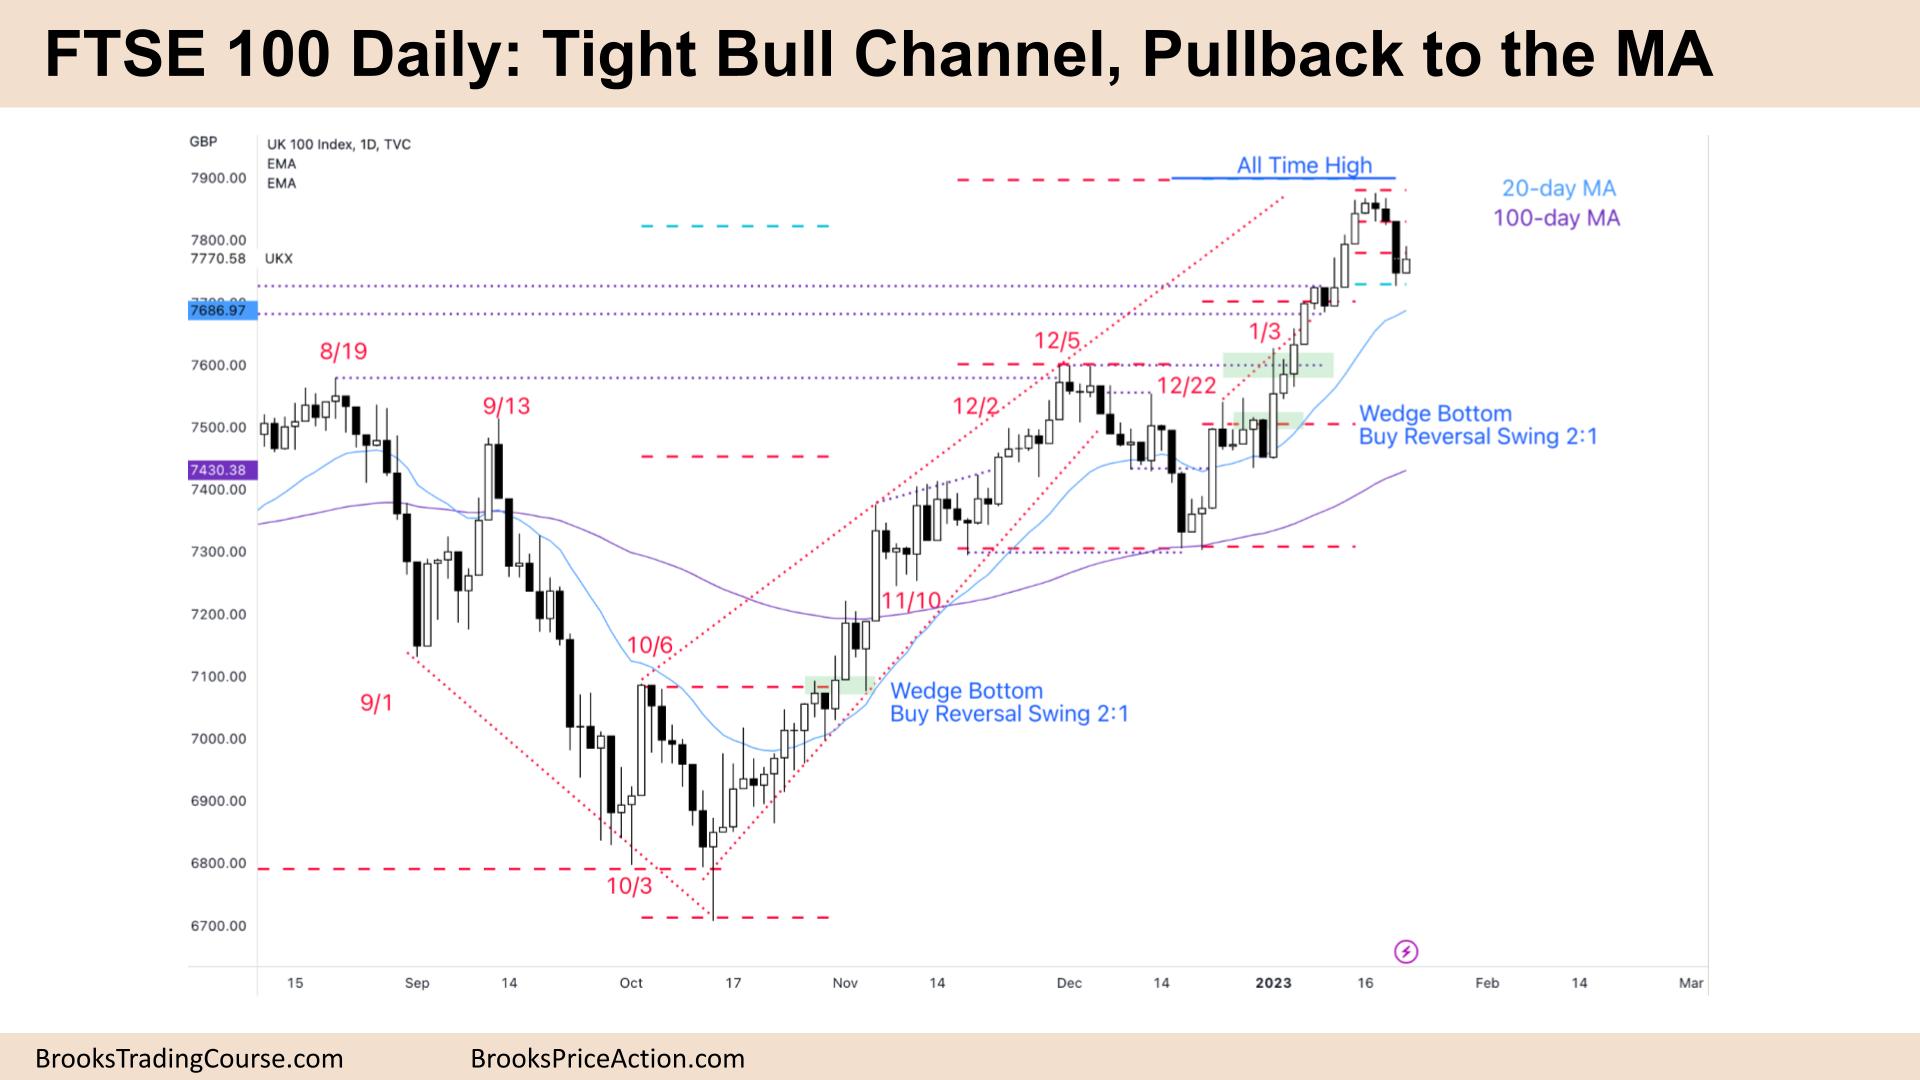 FTSE 100 Tight Bull Channel, Pullback to the MA